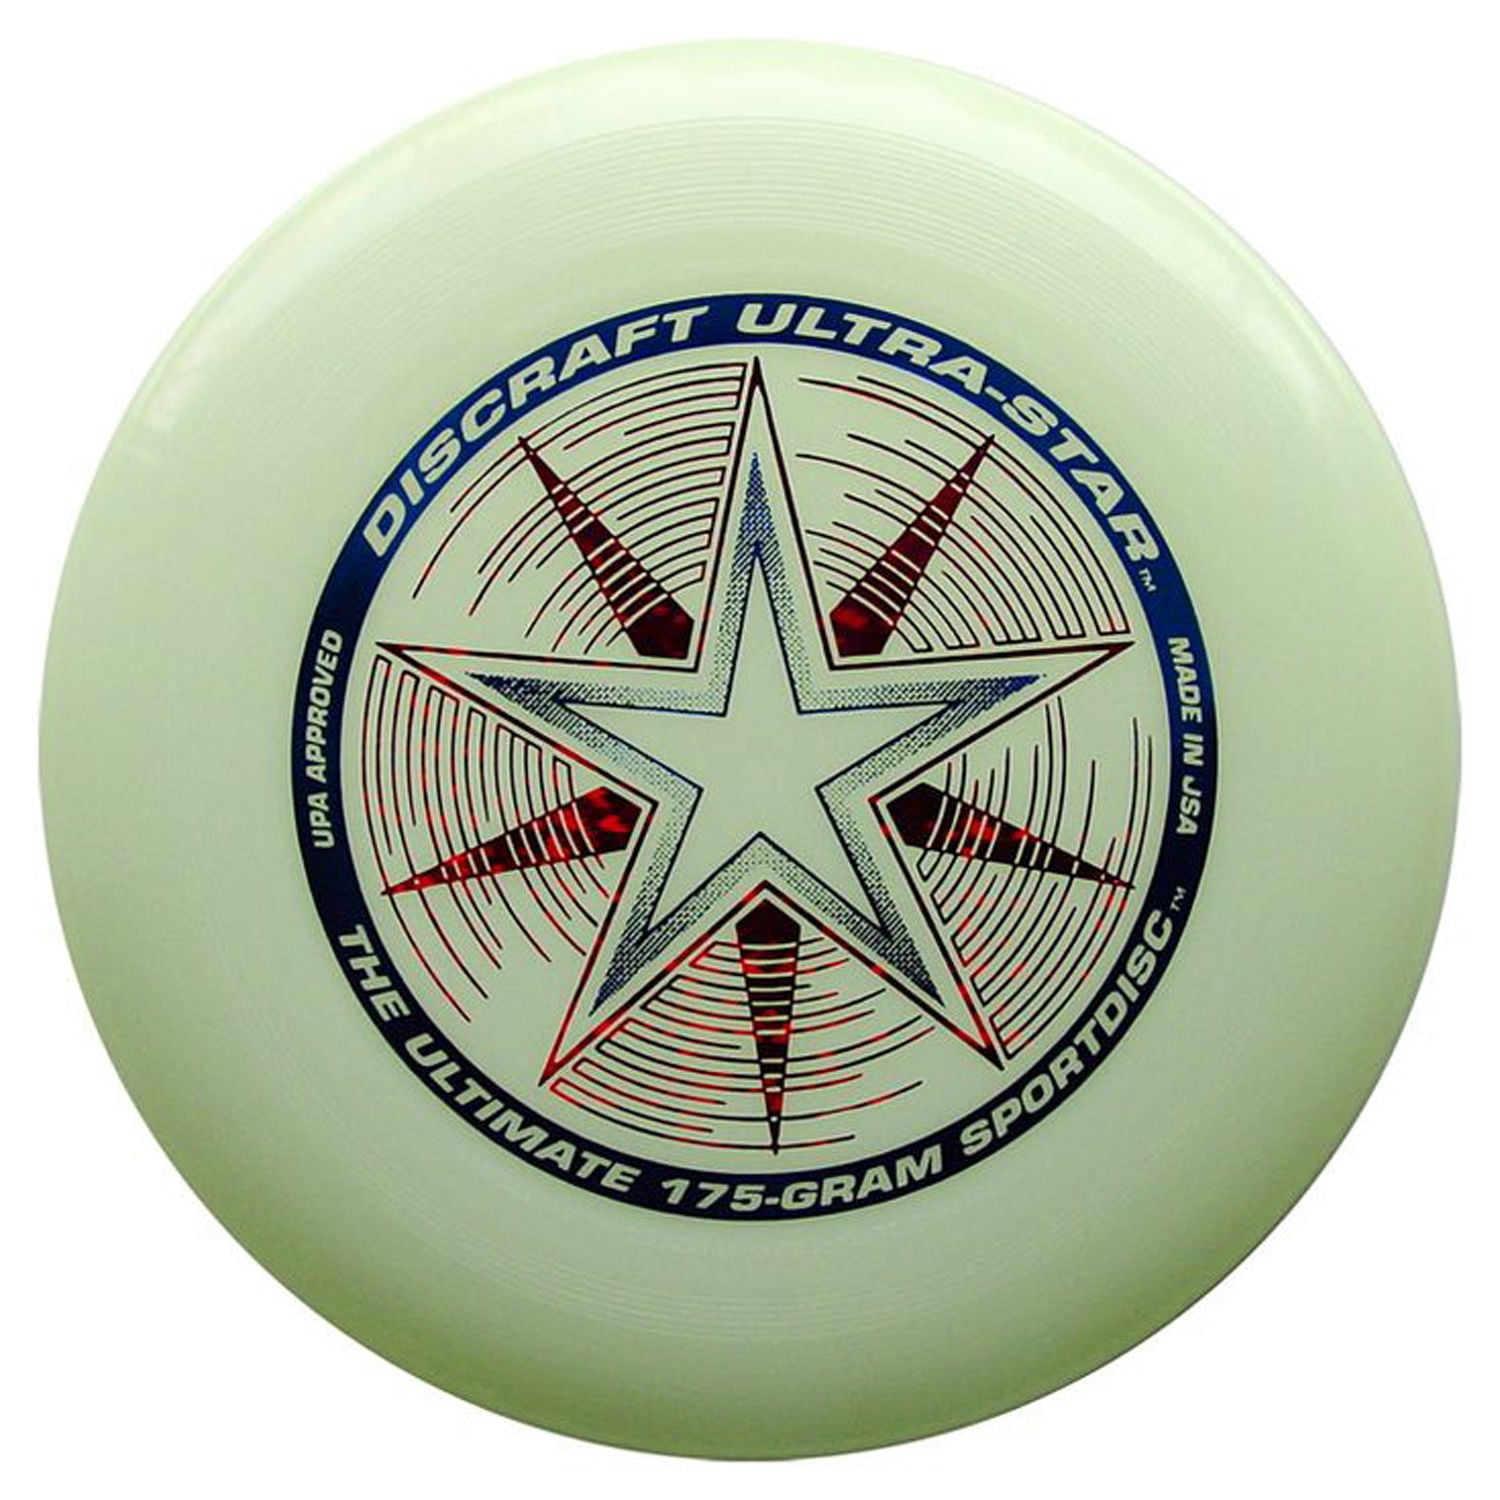 2 Pack BLUE/YELLOW NEW Discraft ULTRA-STAR 175g Ultimate Frisbee Disc 